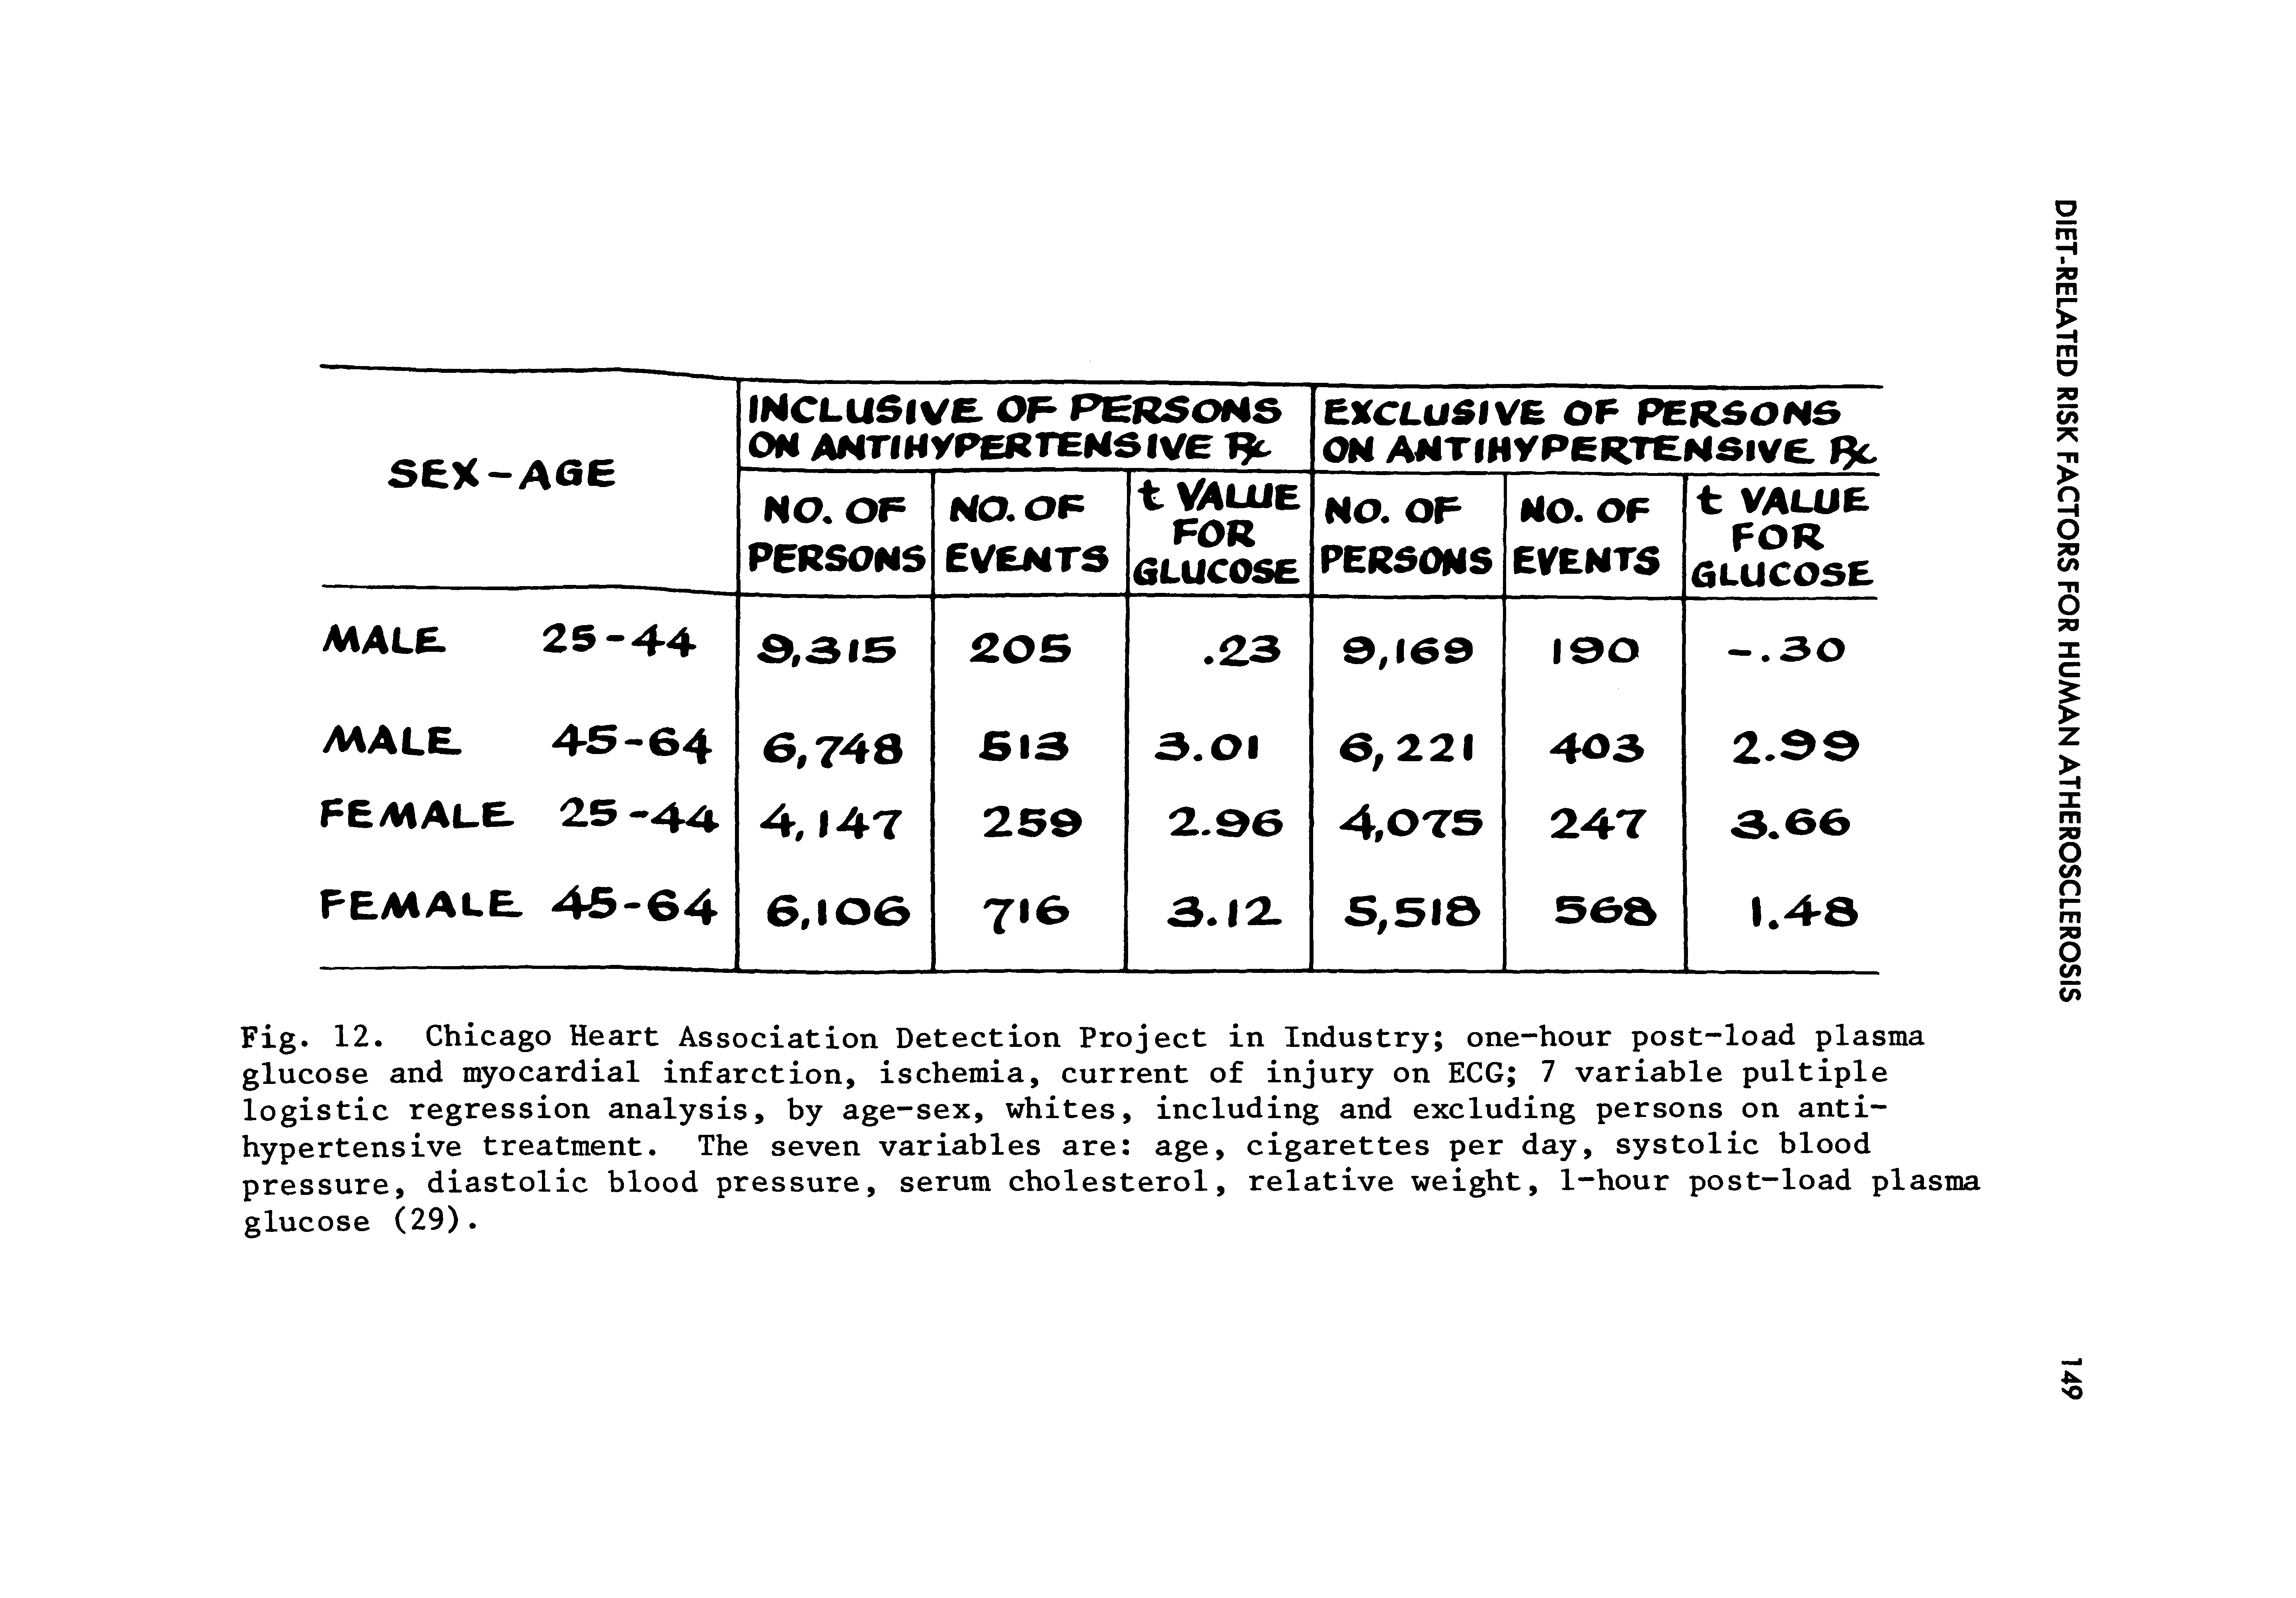 Fig. 12. Chicago Heart Association Detection Project in Industry one-hour post-load plasma glucose and myocardial infarction, ischemia, current of injury on ECG 7 variable pultiple logistic regression analysis, by age-sex, whites, including and excluding persons on antihypertensive treatment. The seven variables are age, cigarettes per day, systolic blood pressure, diastolic blood pressure, serum cholesterol, relative weight, 1-hour post-load plasma glucose (29).